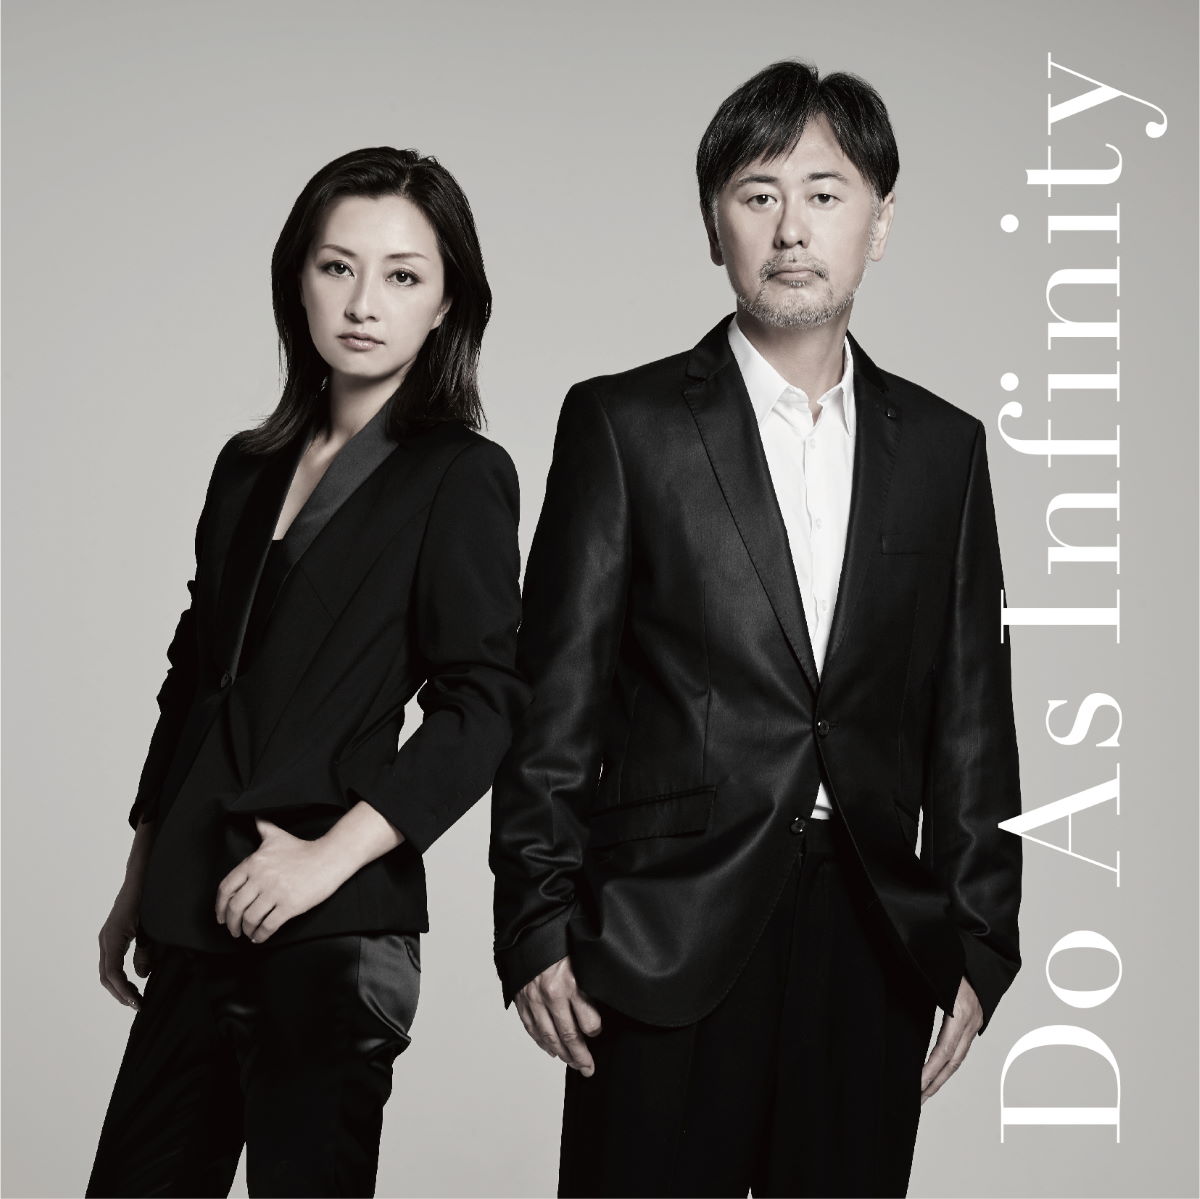 『Do As Infinity - Believe In Your Emotion』収録の『Do As Infinity』ジャケット